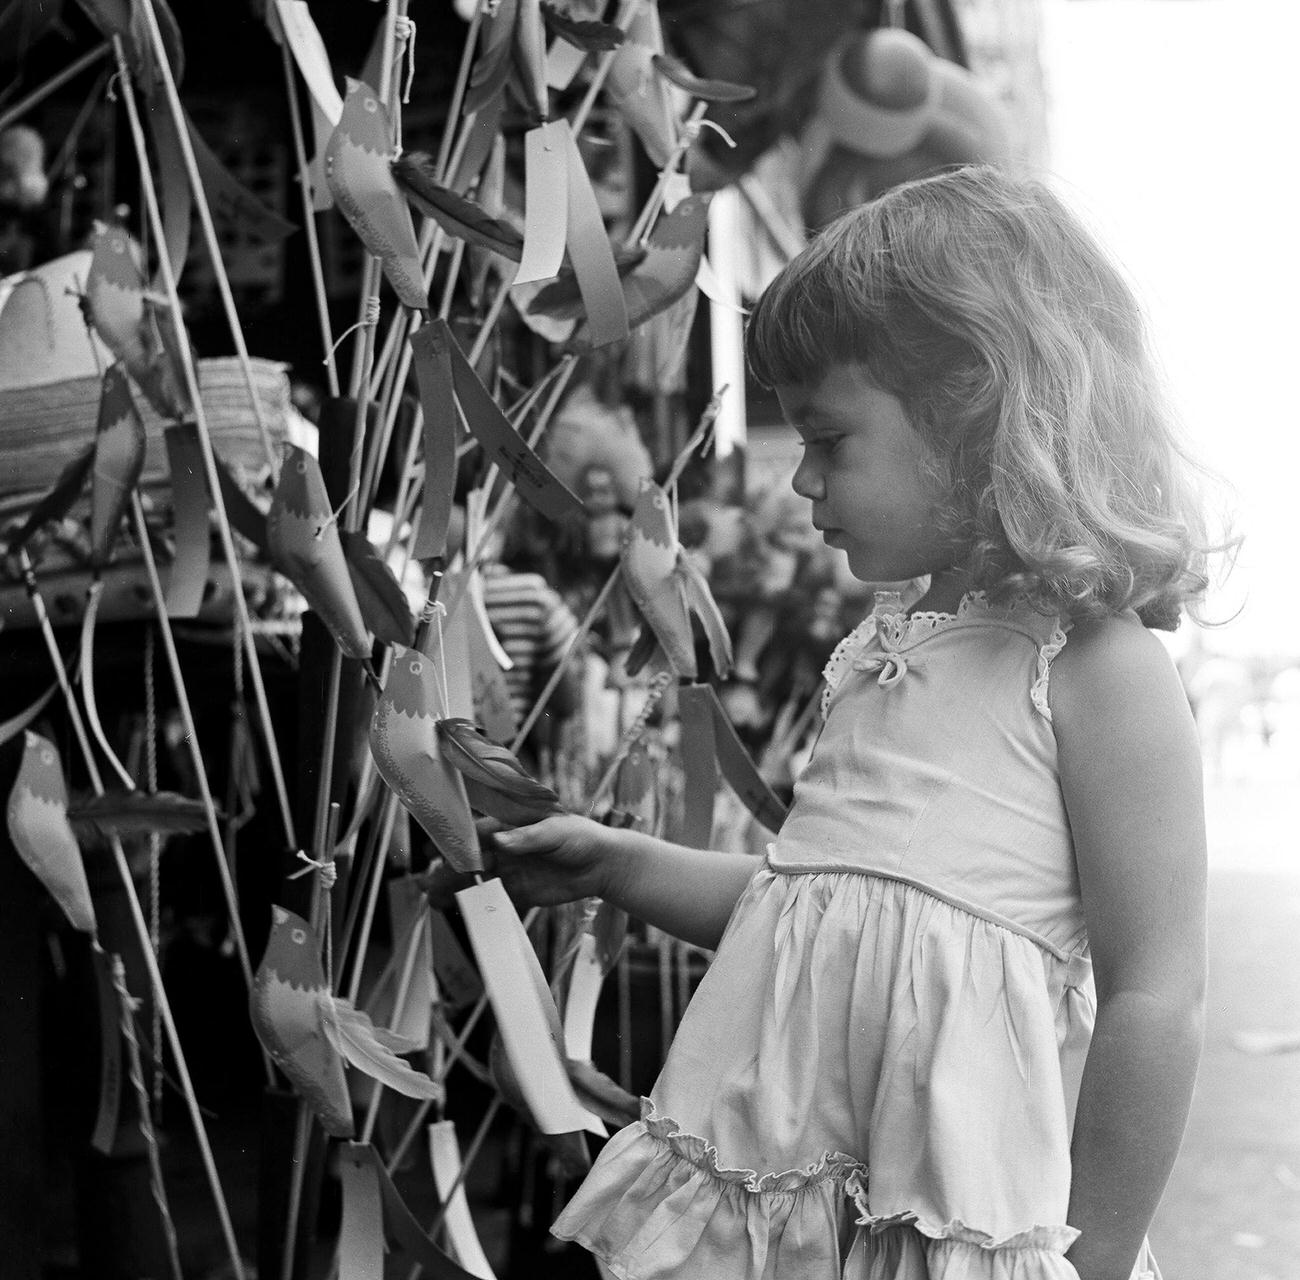 Girl Picking Toy From Storefront Vendor, 1948